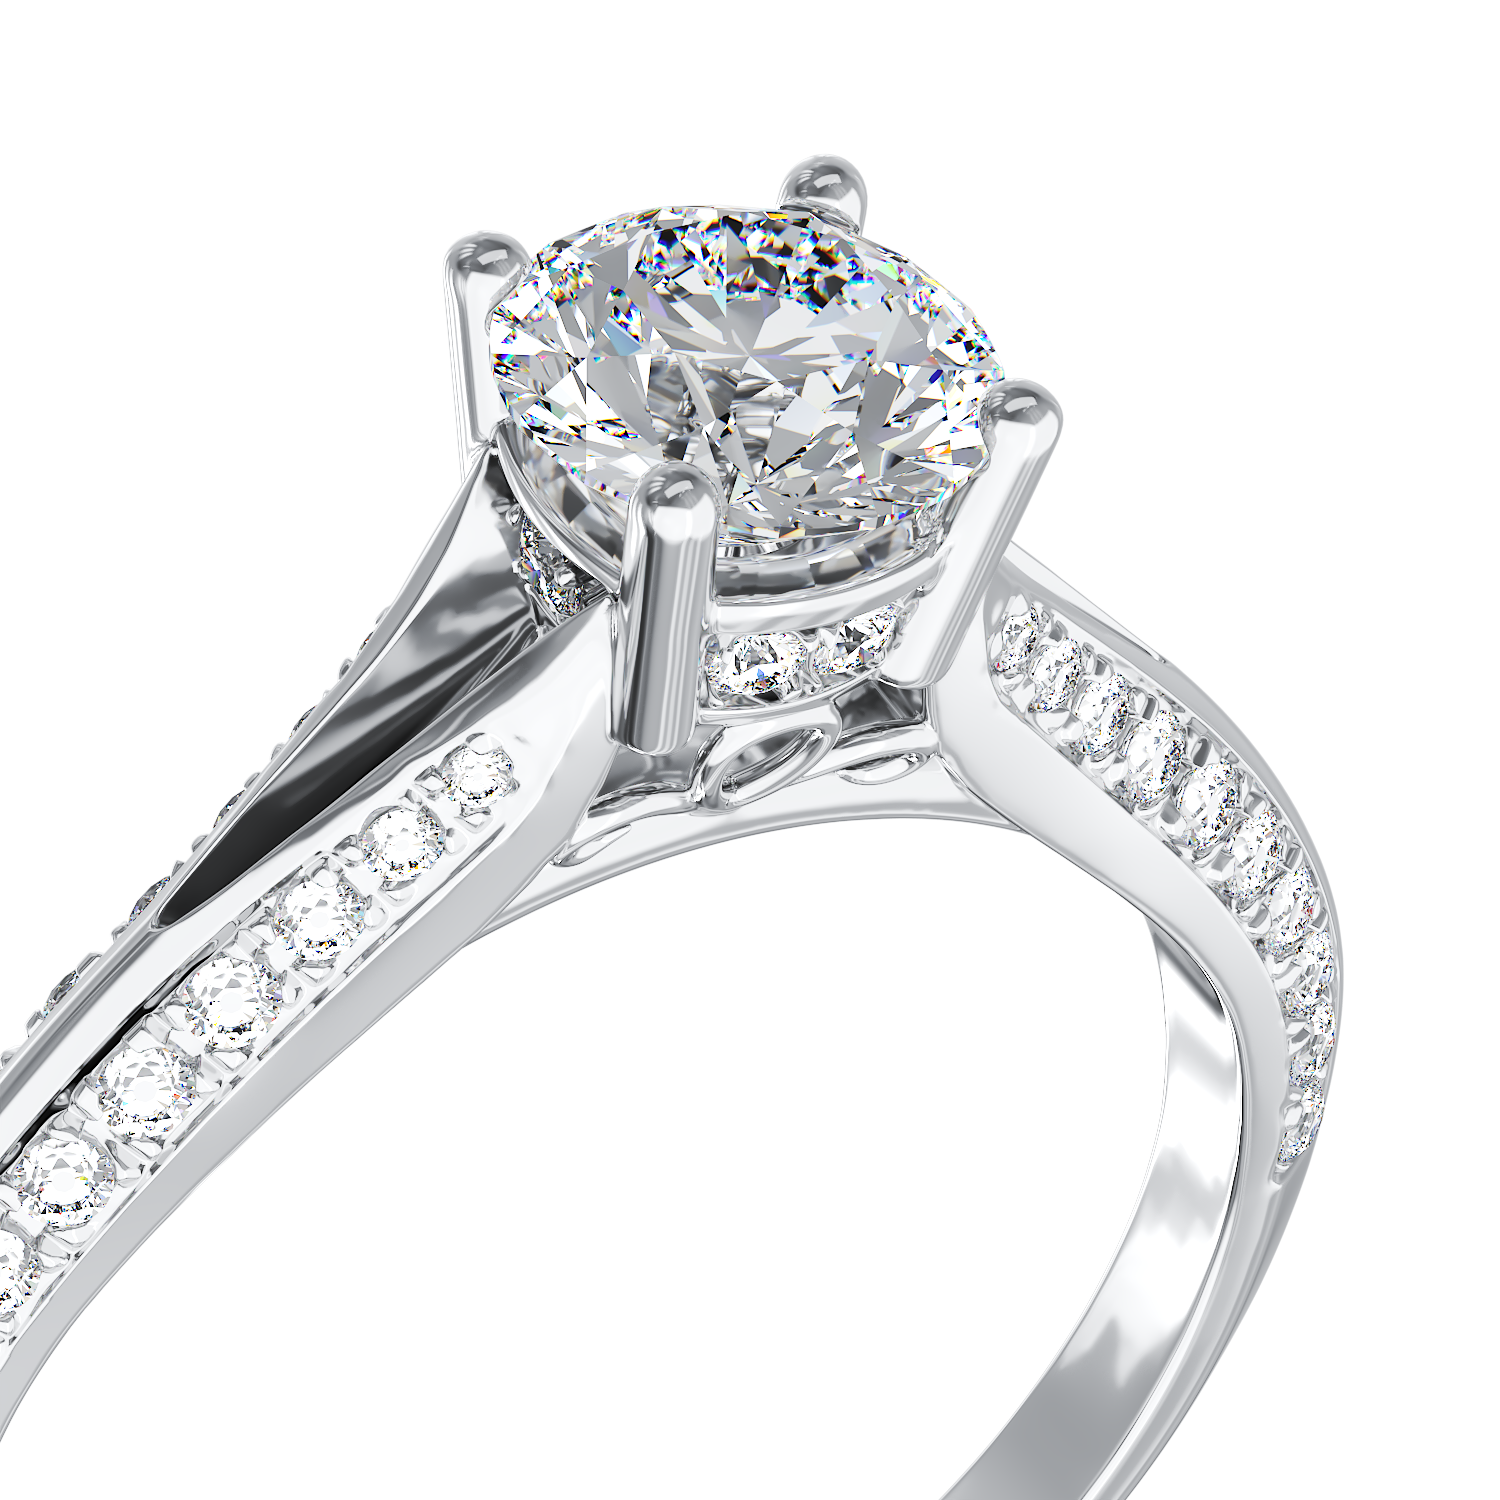 18K white gold engagement ring with 0.55ct diamond and 0.28ct diamonds